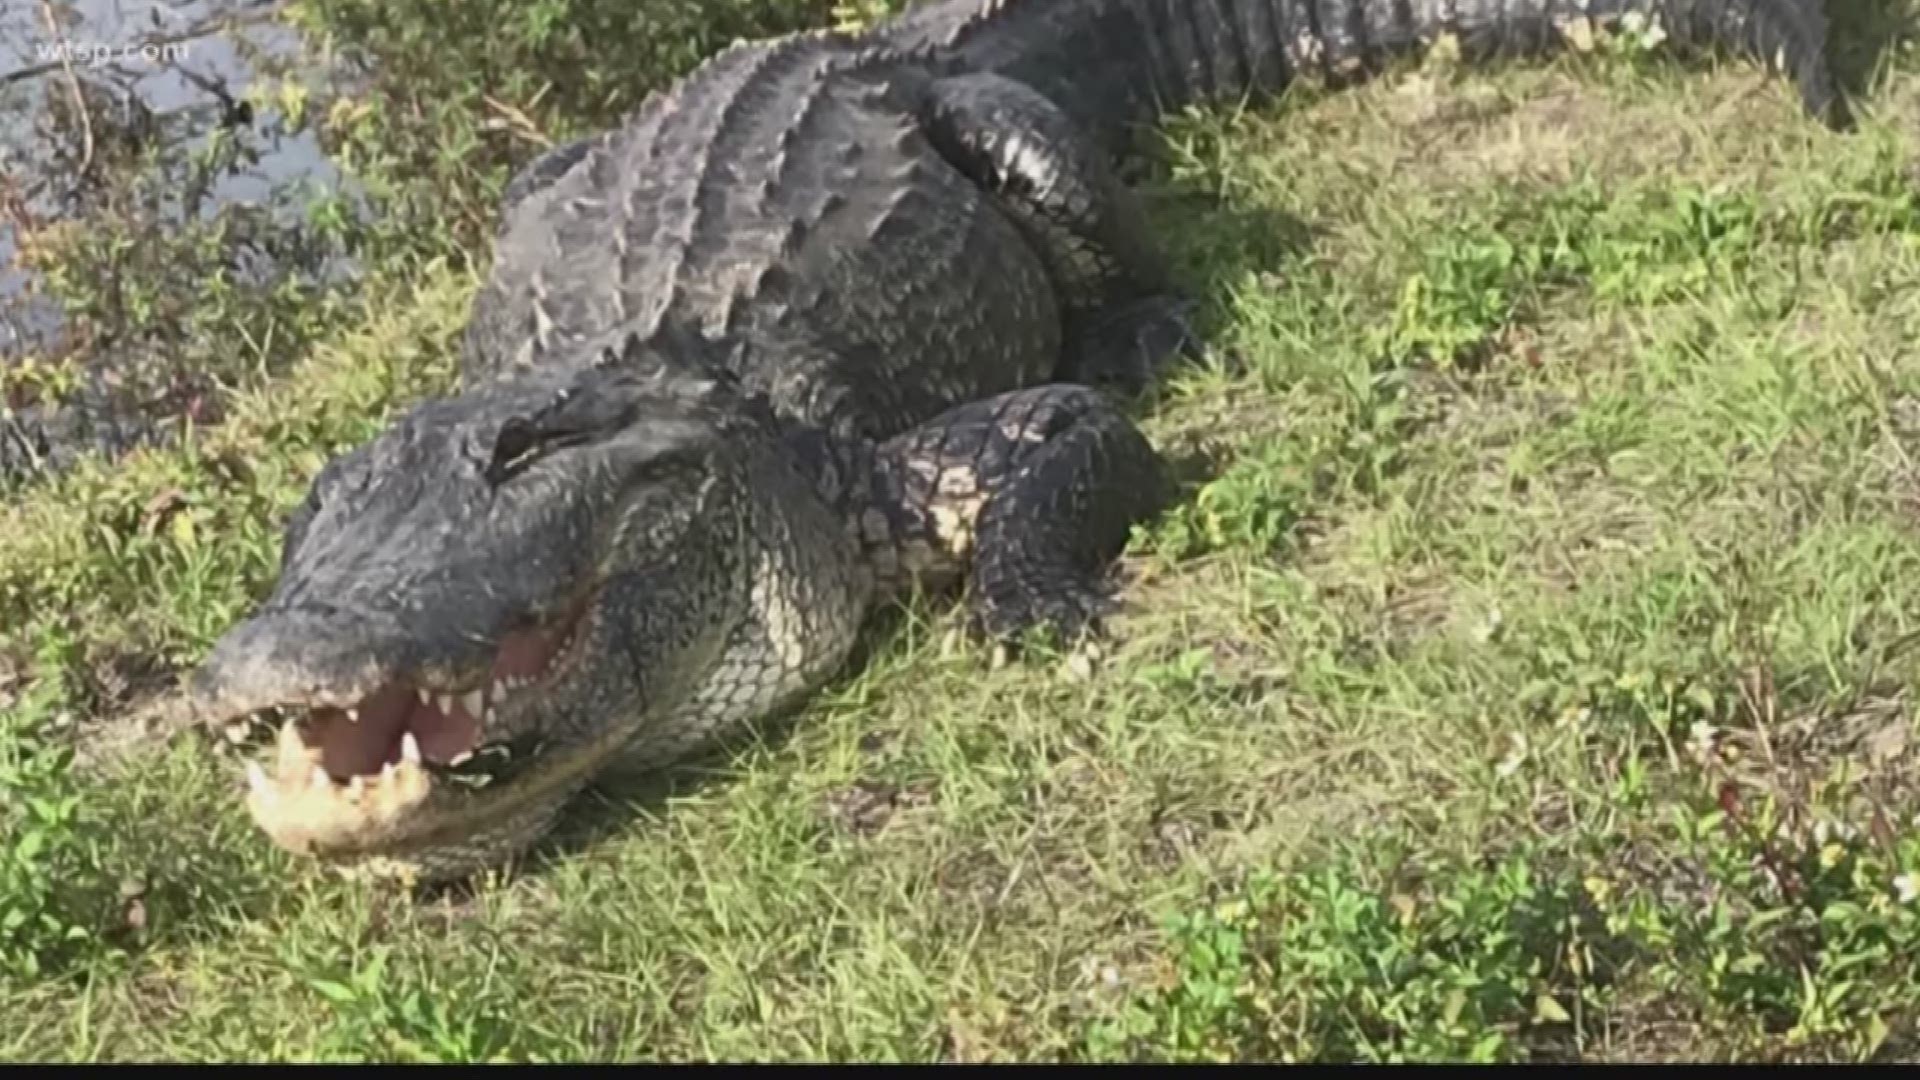 When parts of the Tampa Bay area neared all-time high temperatures Tuesday, maybe this gator wanted in on some of the sunshine?